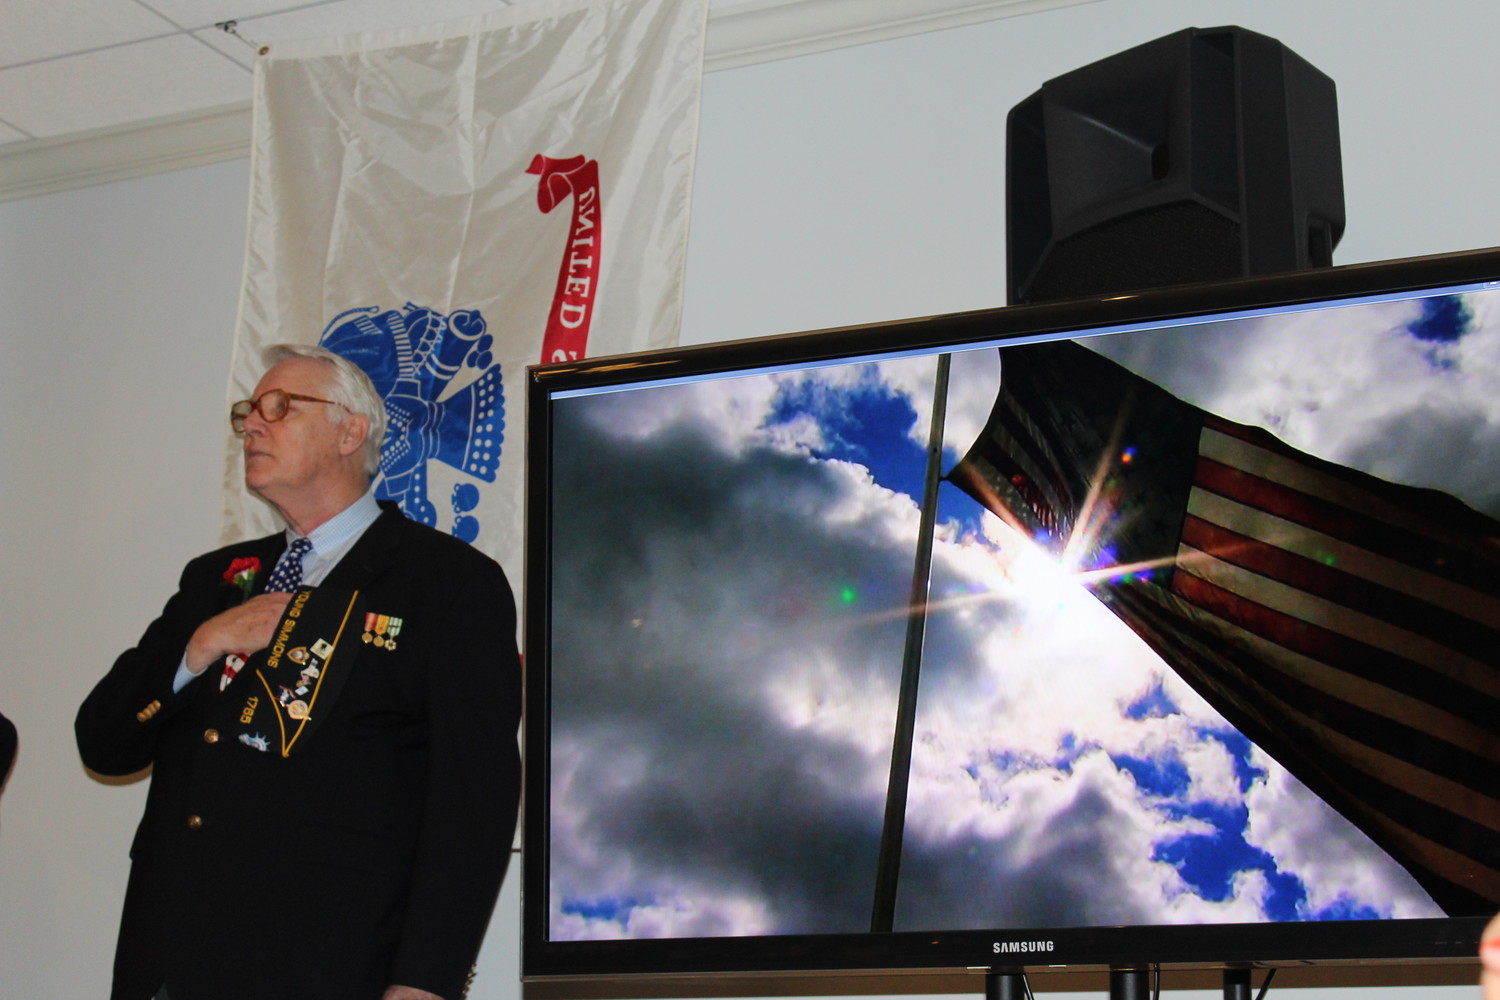 Glen Cove resident Fred Nielsen recited the pledge of allegiance at last year’s Heroes Among Us charity dinner.